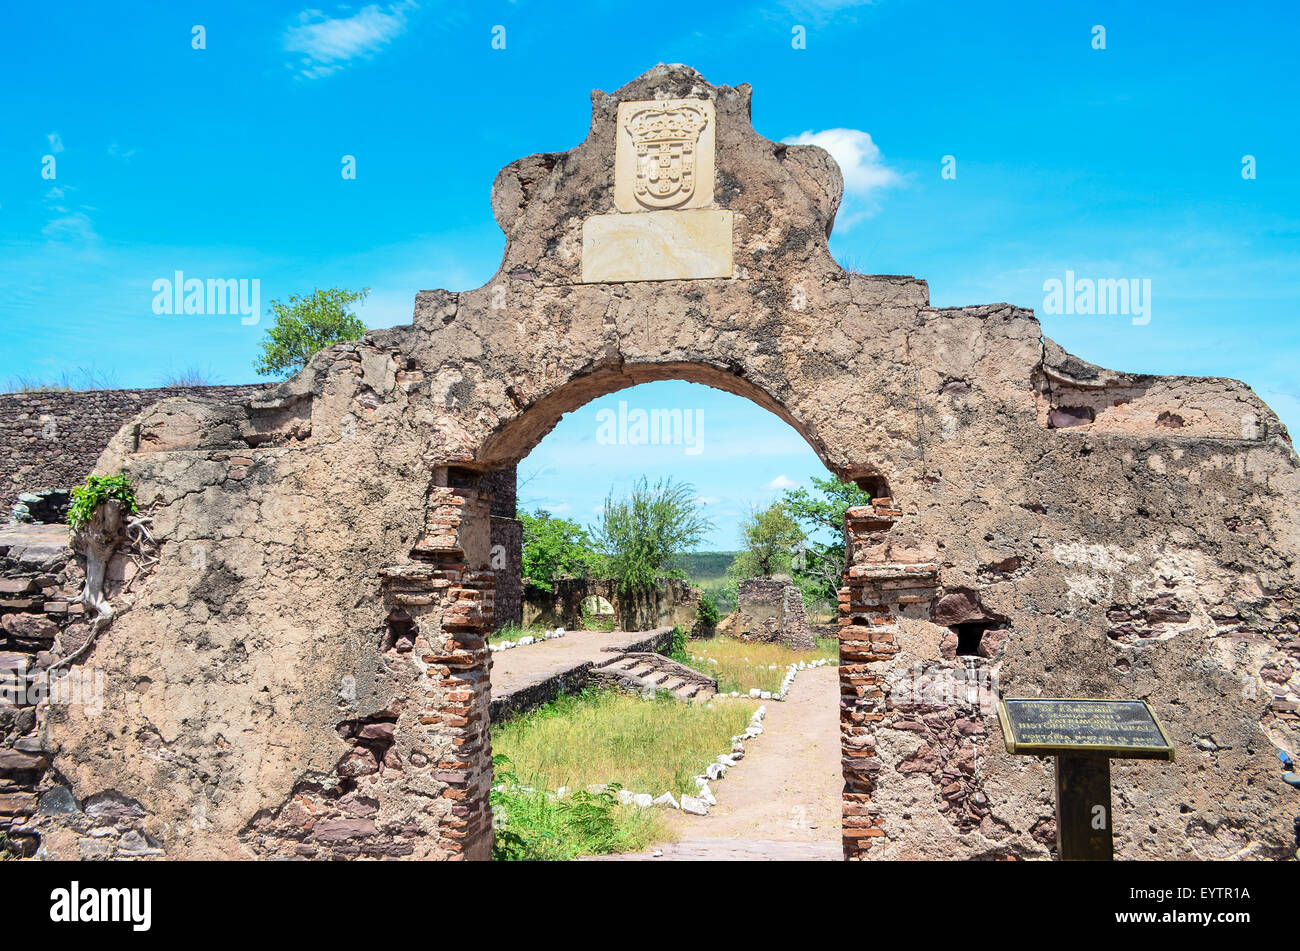 Ruins of the Fortress of Cambambe/Kambambe, an historic stronghold built by the Portuguese, in the Cuanza Norte province, Angola Stock Photo